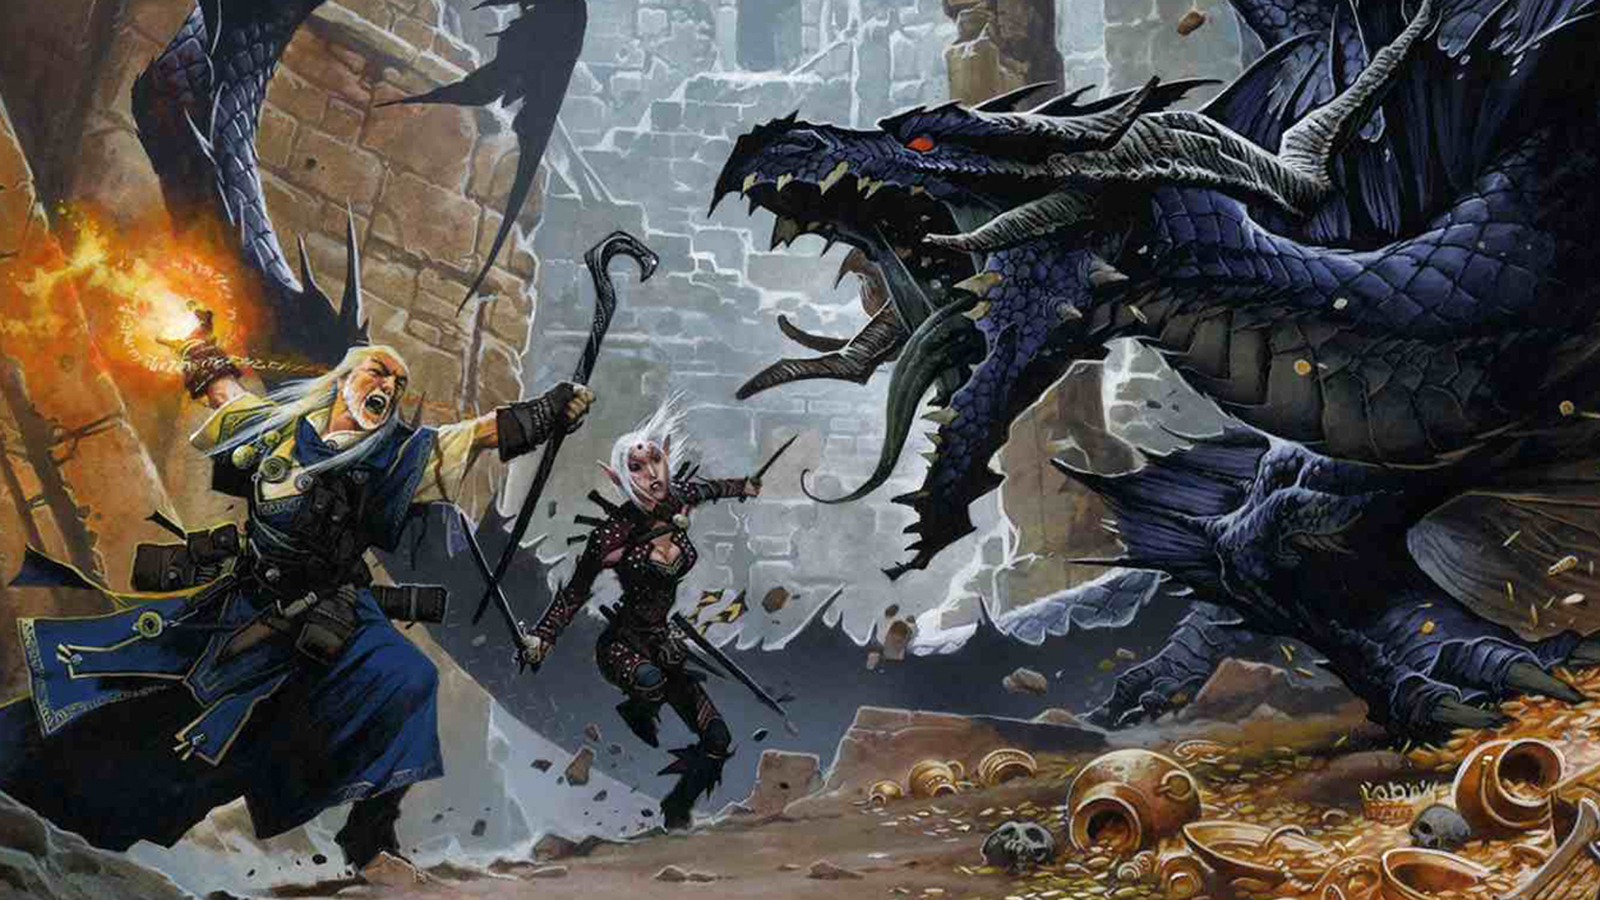 Get everything you need to play Pathfinder for $5 in this Humble